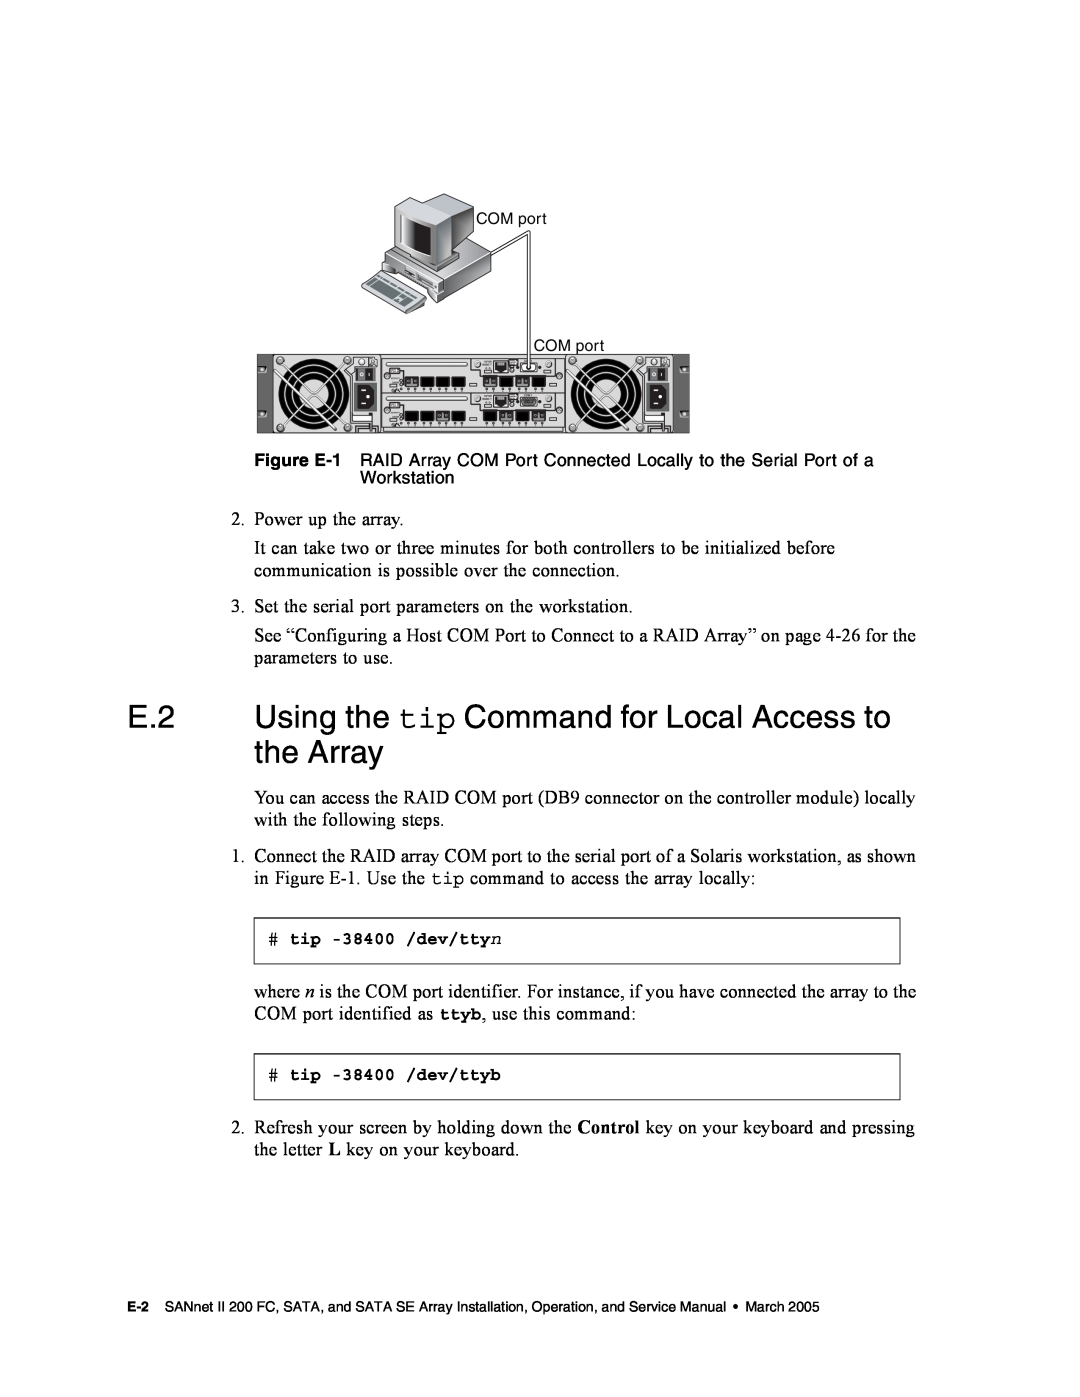 Dot Hill Systems II 200 FC service manual E.2 Using the tip Command for Local Access to the Array 